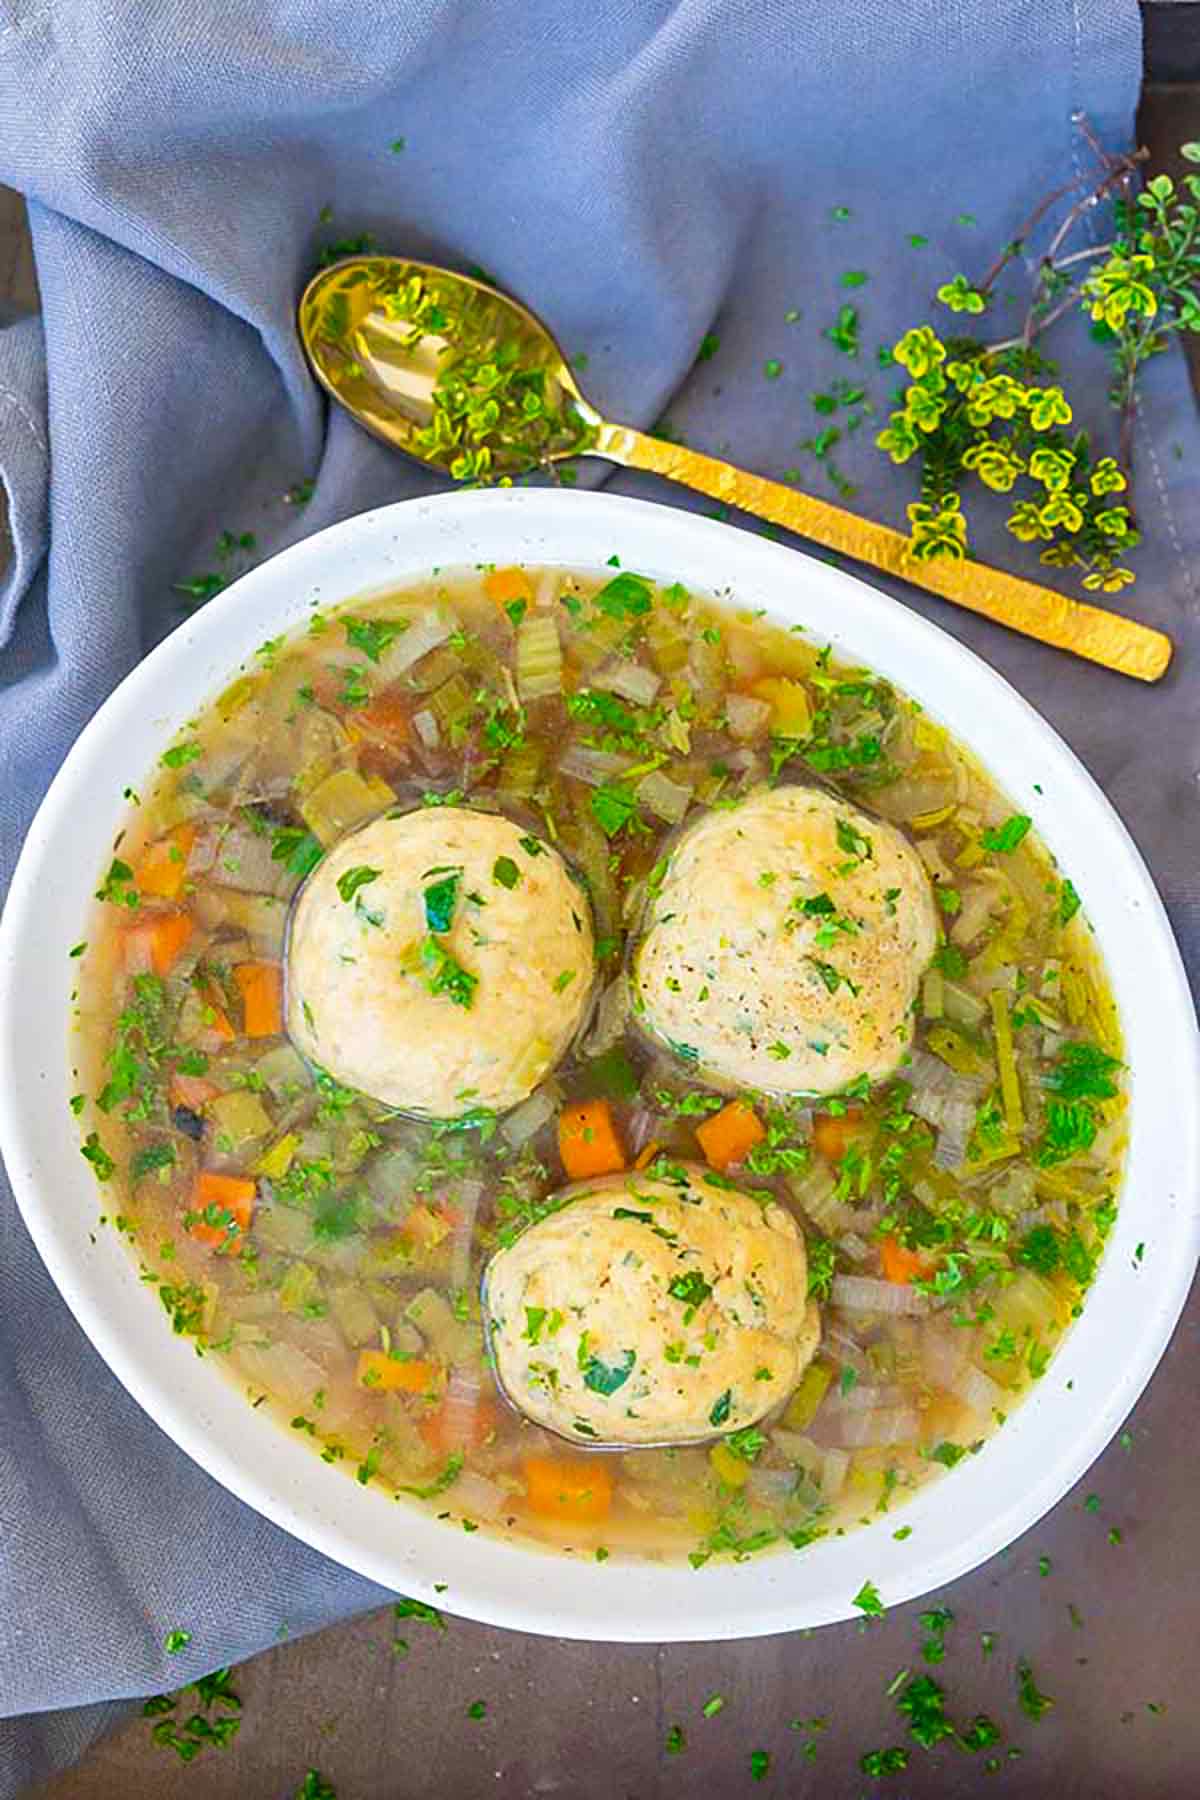 a bowl of matzo ball soup garnished with parsley